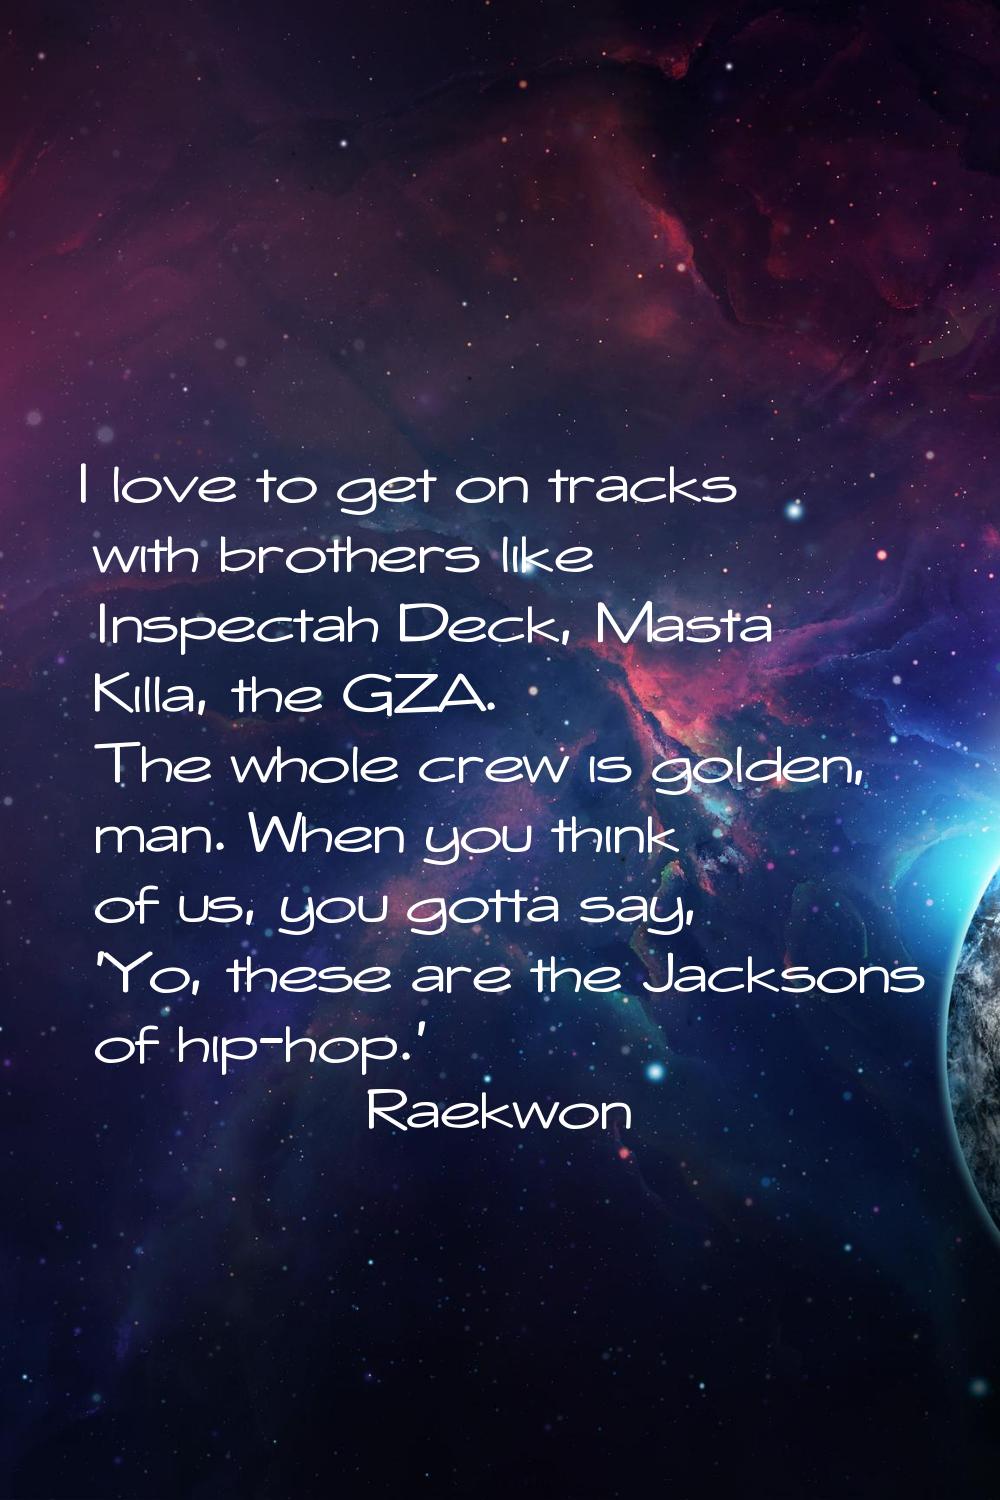 I love to get on tracks with brothers like Inspectah Deck, Masta Killa, the GZA. The whole crew is 